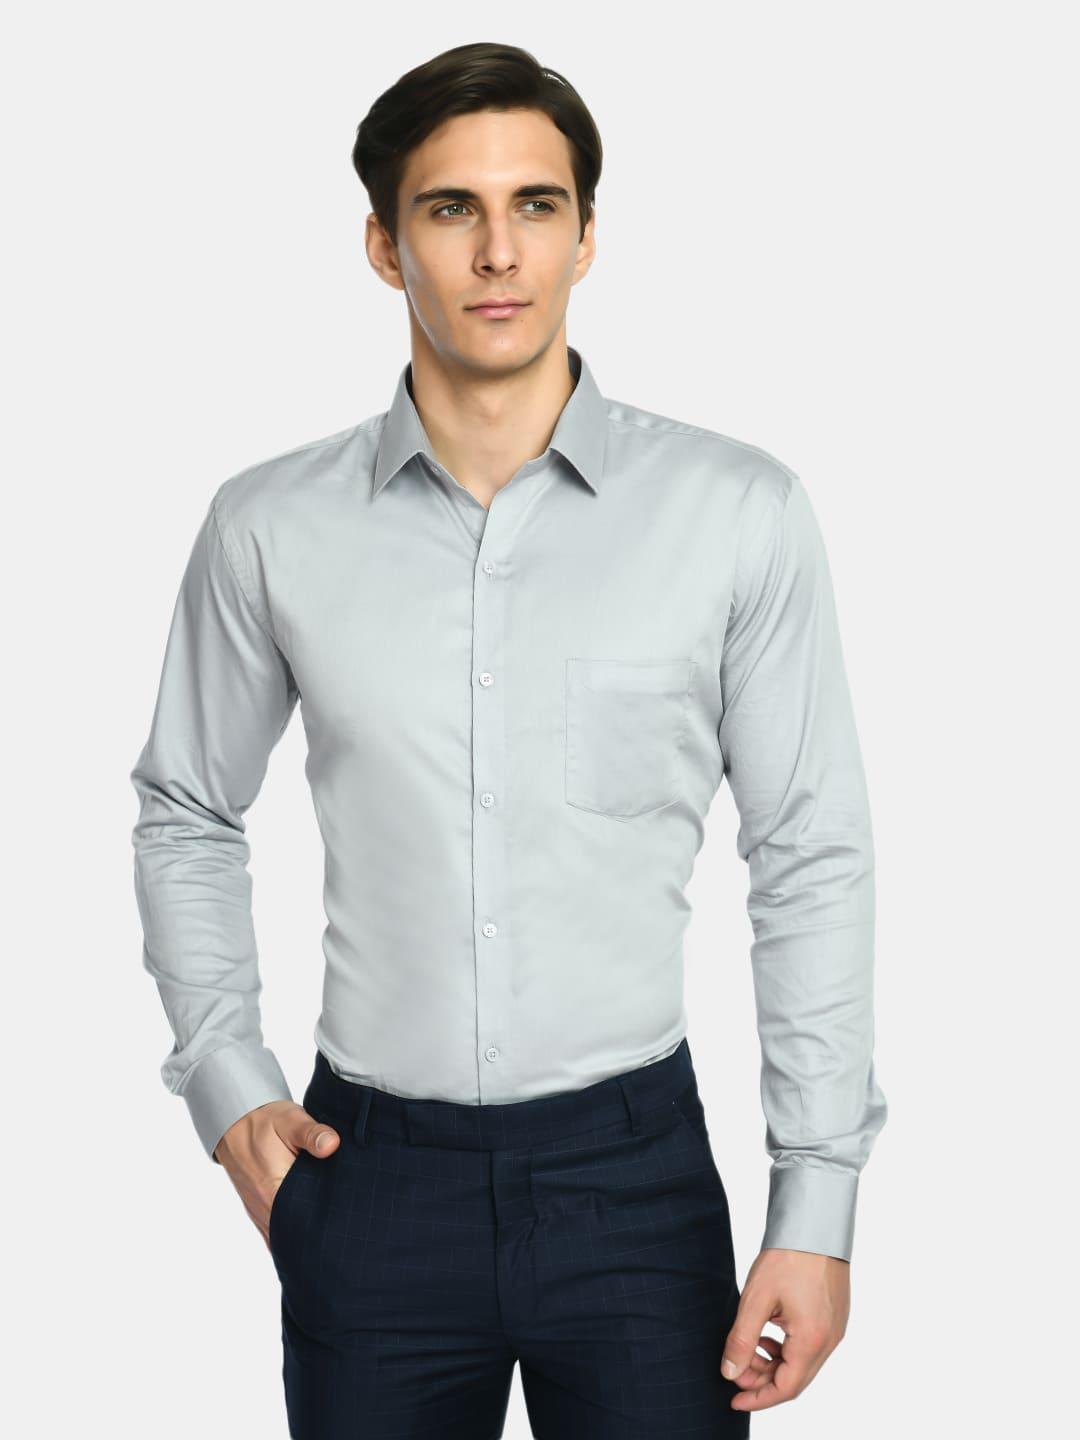 Solid Grey Formal Shirt with Curved Hemline